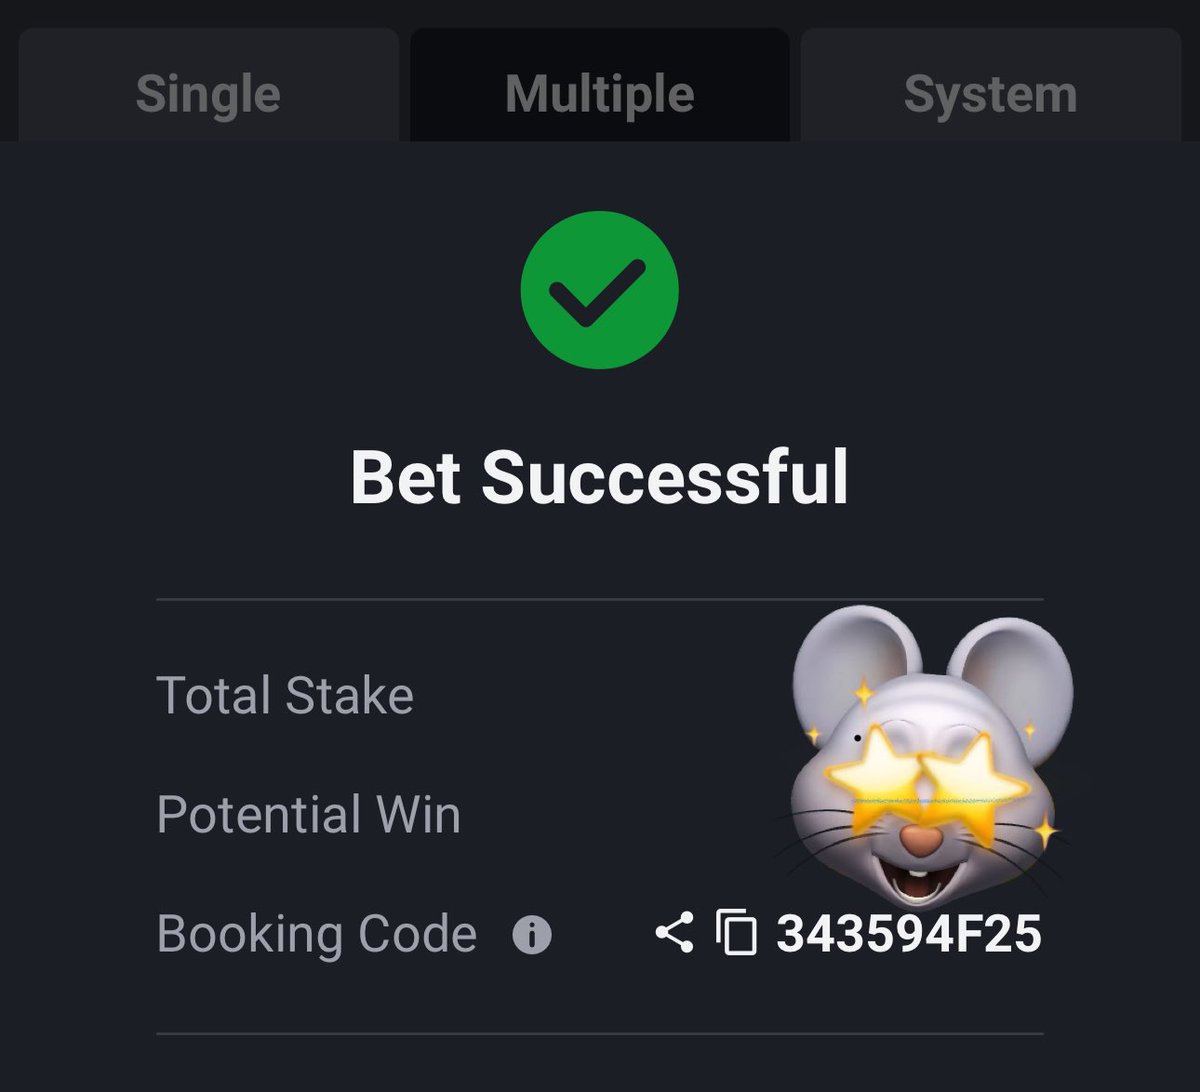 Go and place your bet @Sportybet

Good luck fams❤️